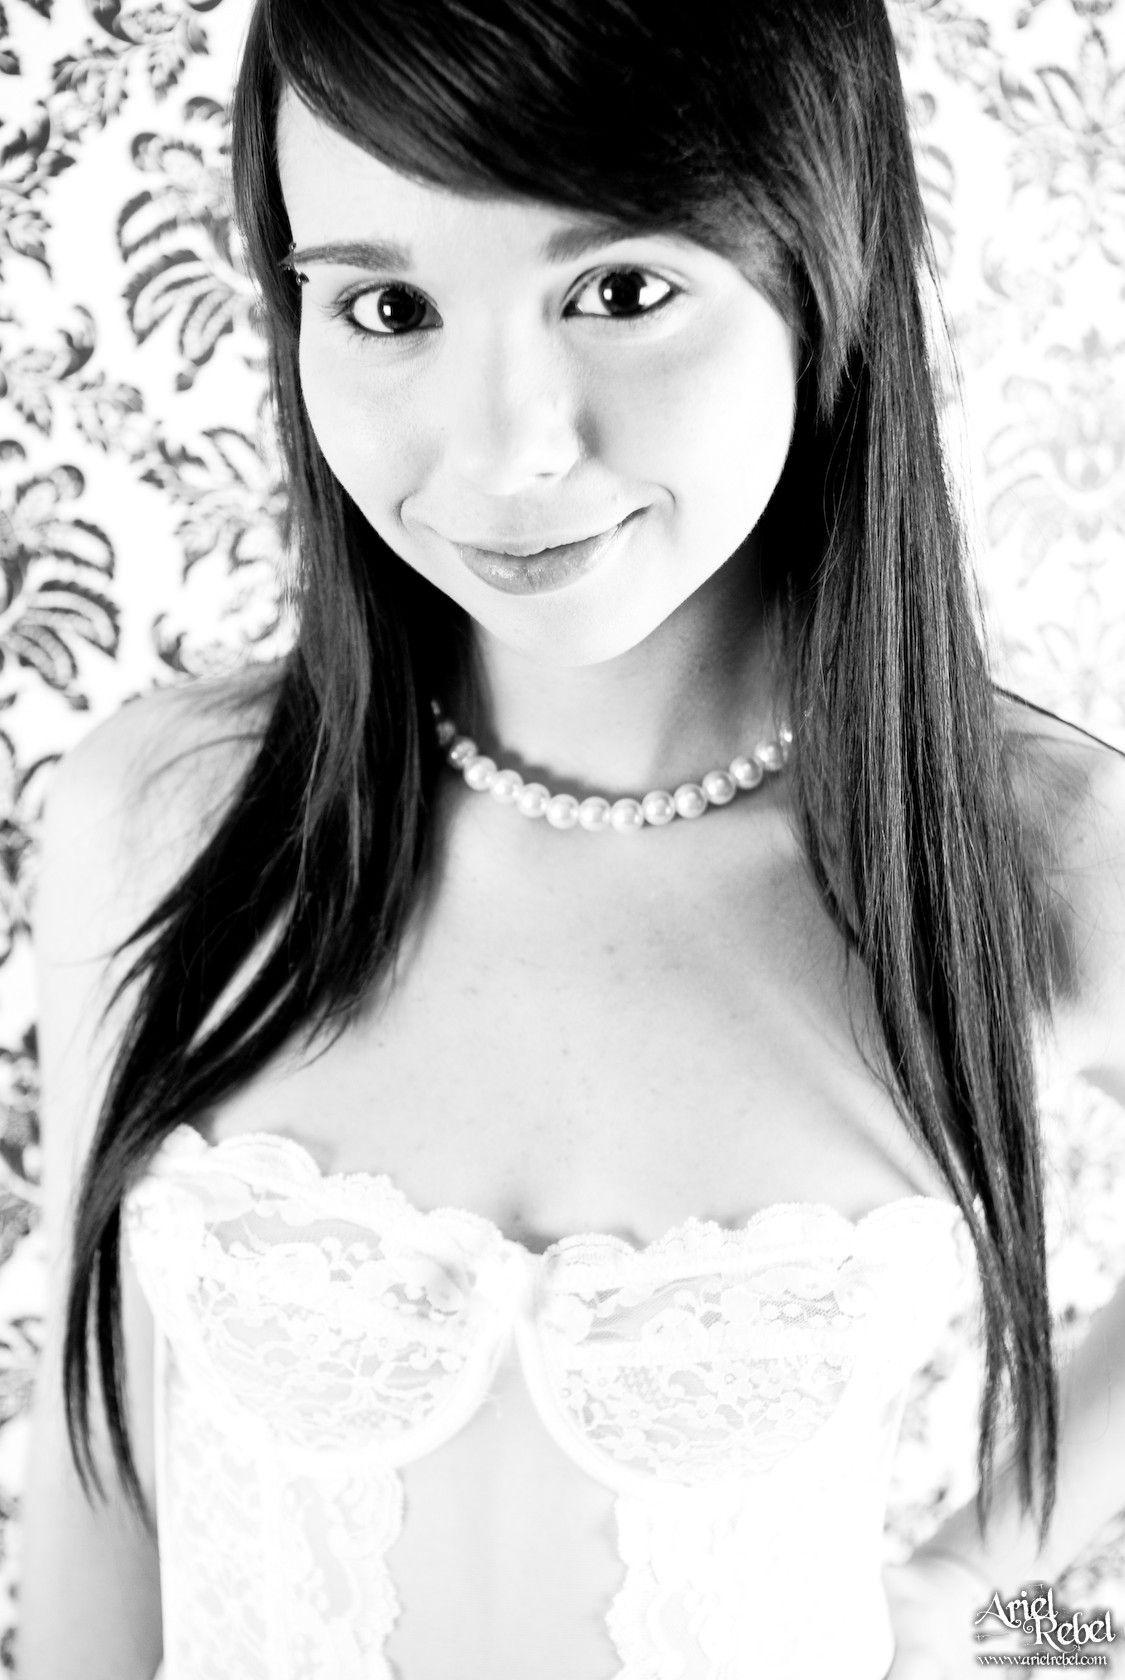 Pictures Of Ariel Rebel Looking Vintage In Black And White